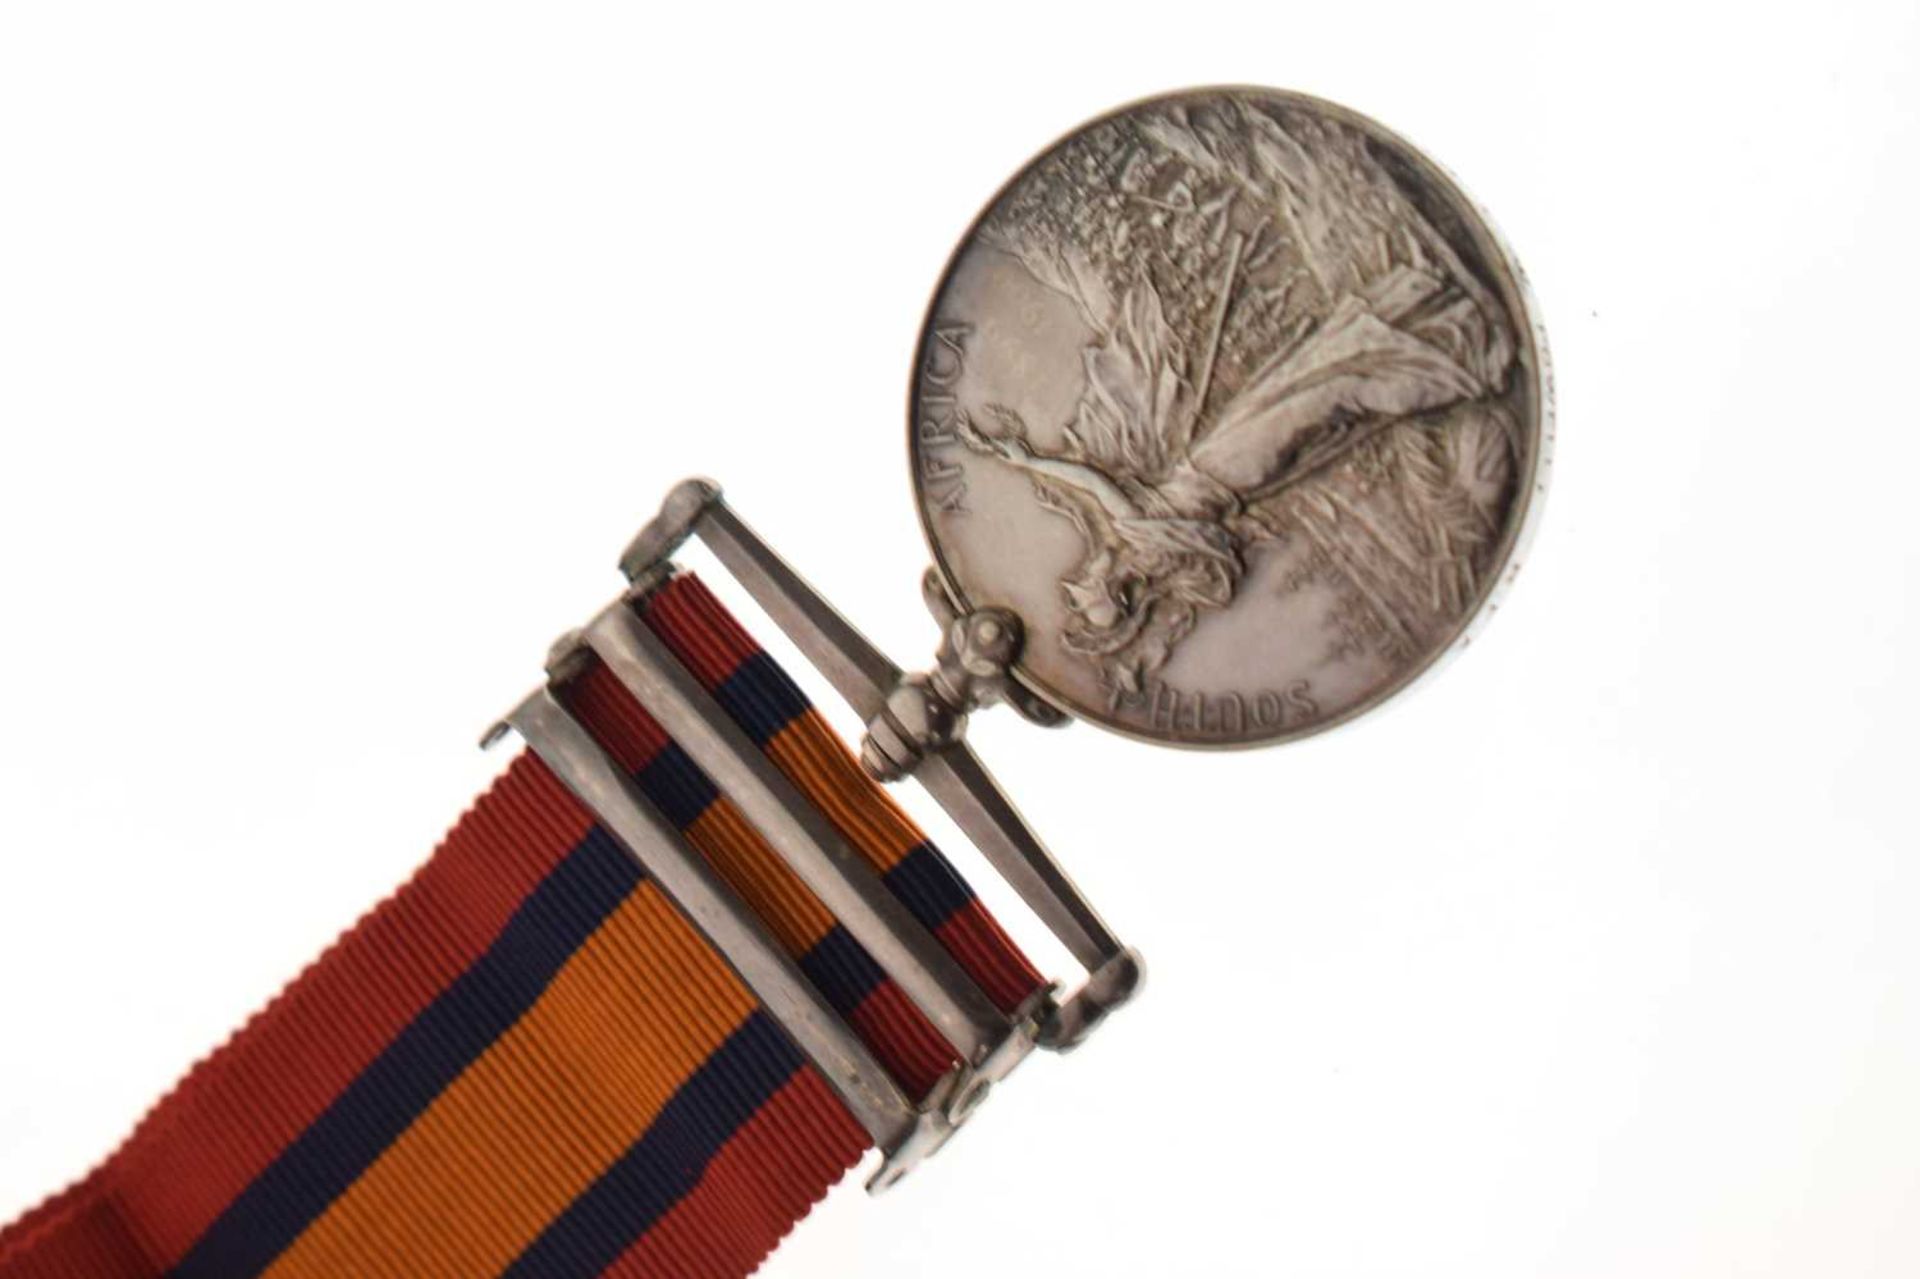 Queen's South Africa Medal 1899-1902 - Image 6 of 11